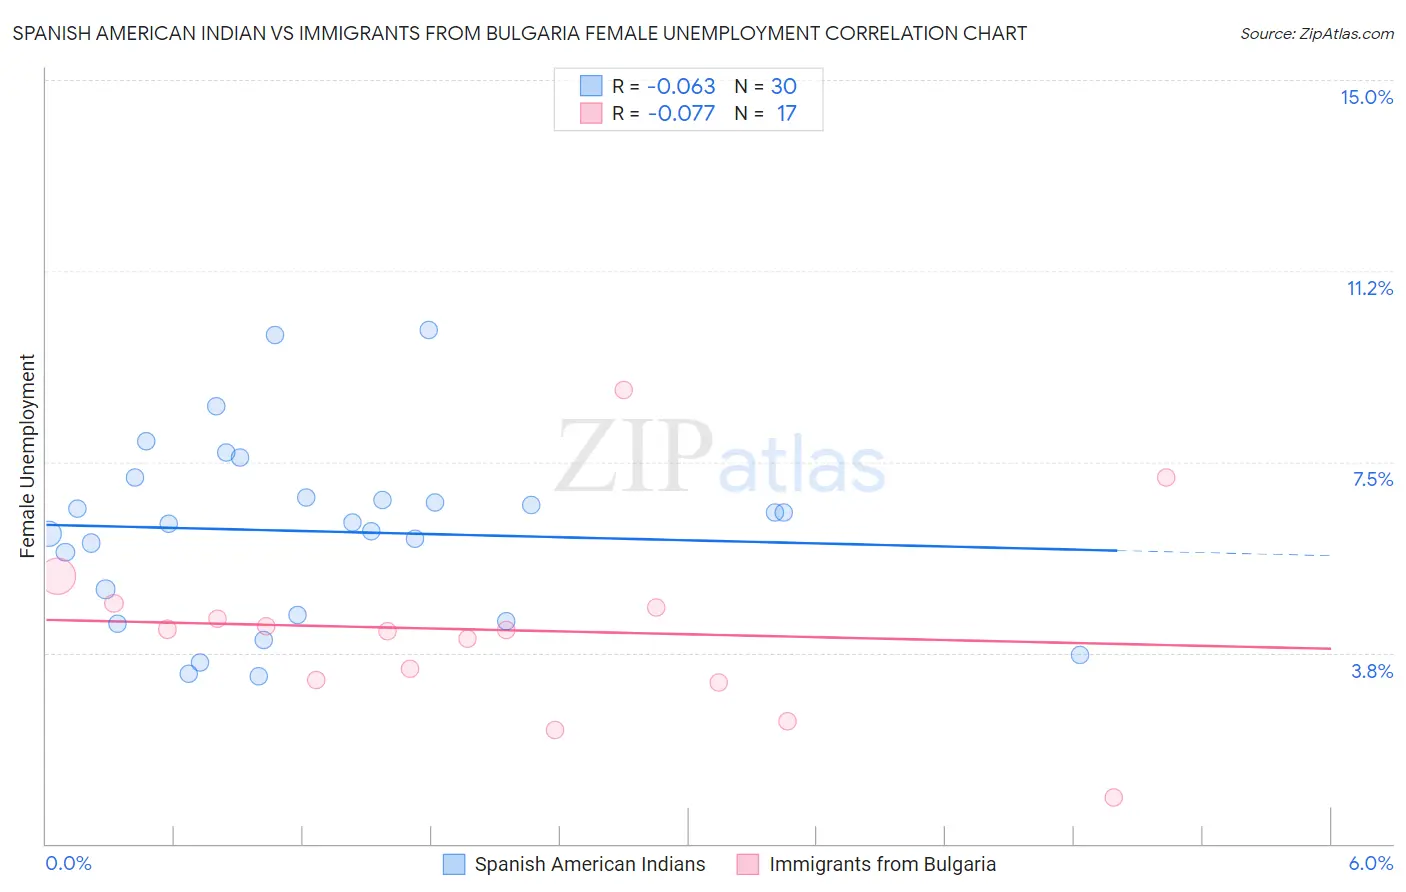 Spanish American Indian vs Immigrants from Bulgaria Female Unemployment